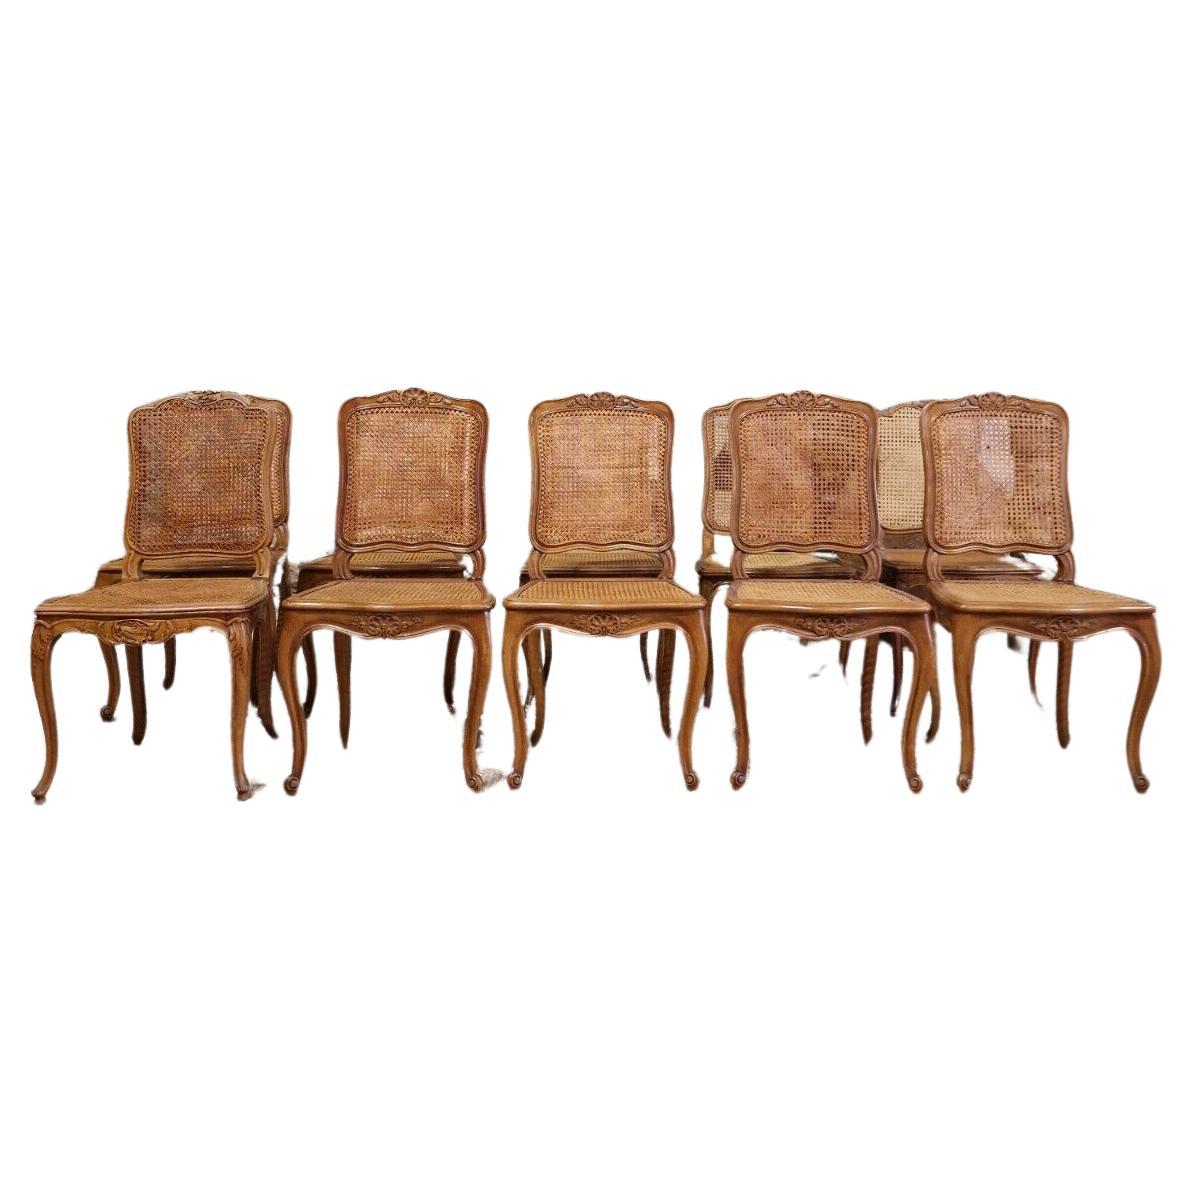 Antique French Cane Dining Chairs Suite of 10